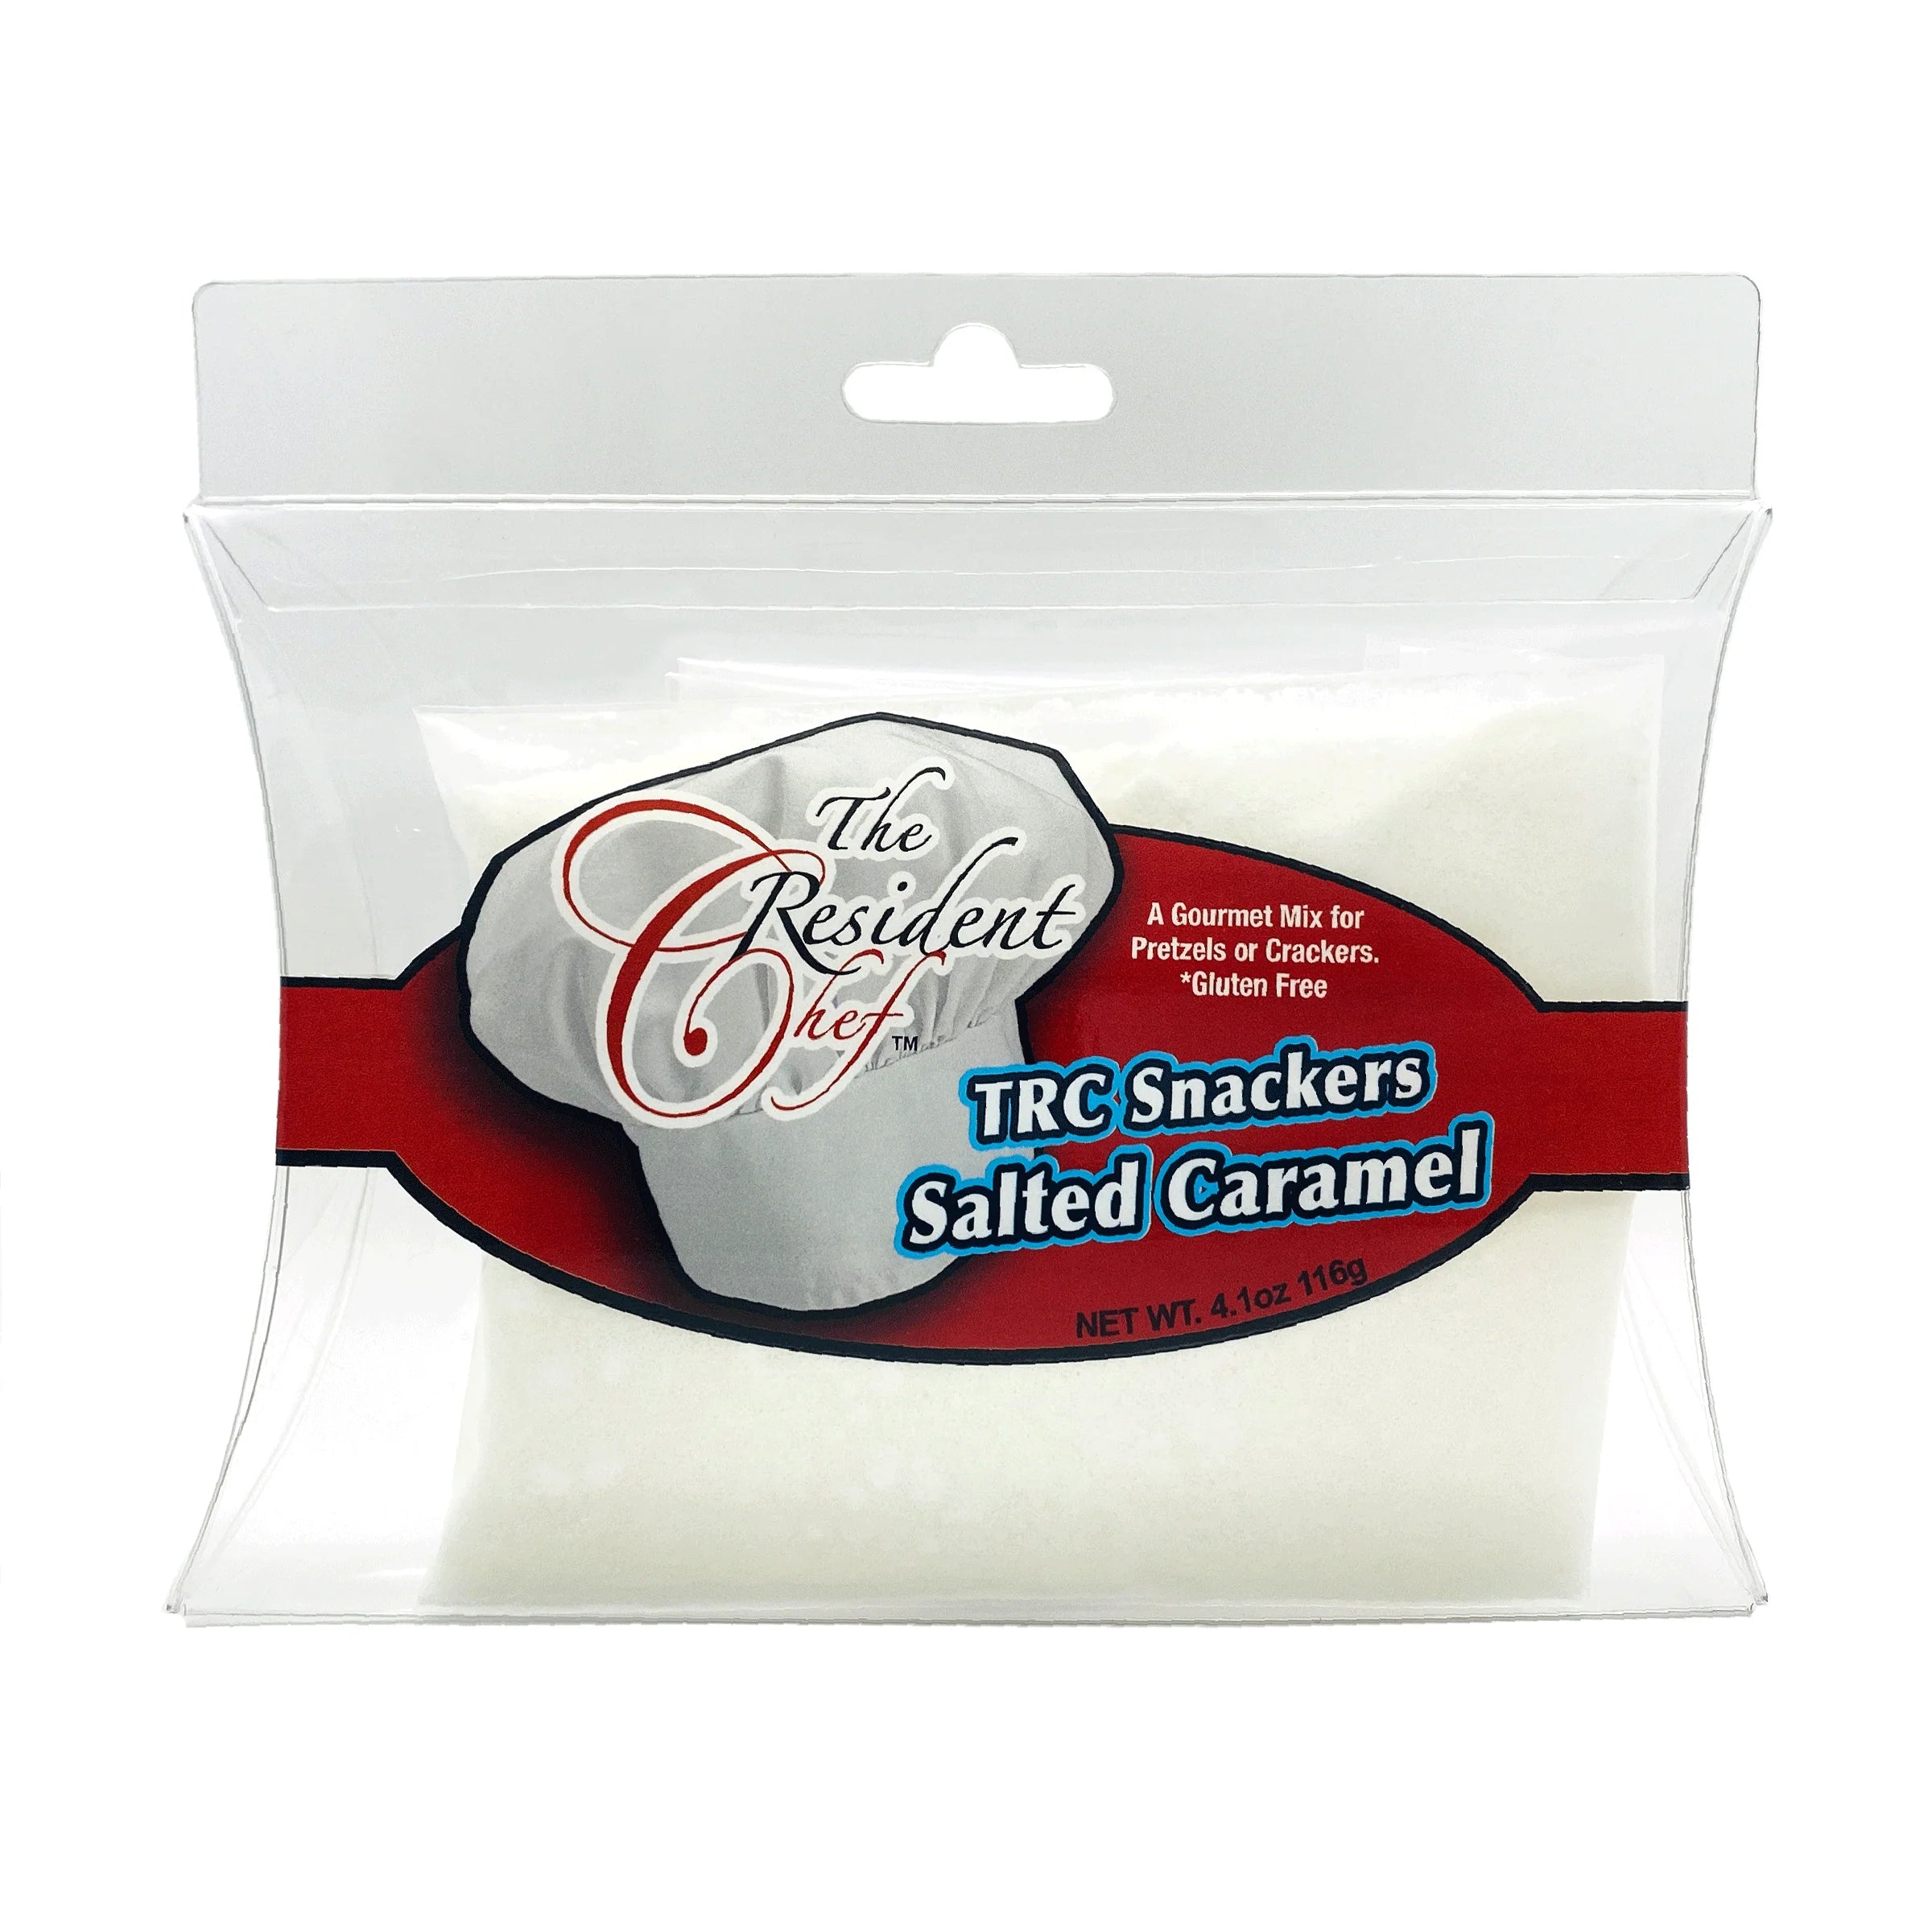 TRC SNACKERS SALTED CARAMEL